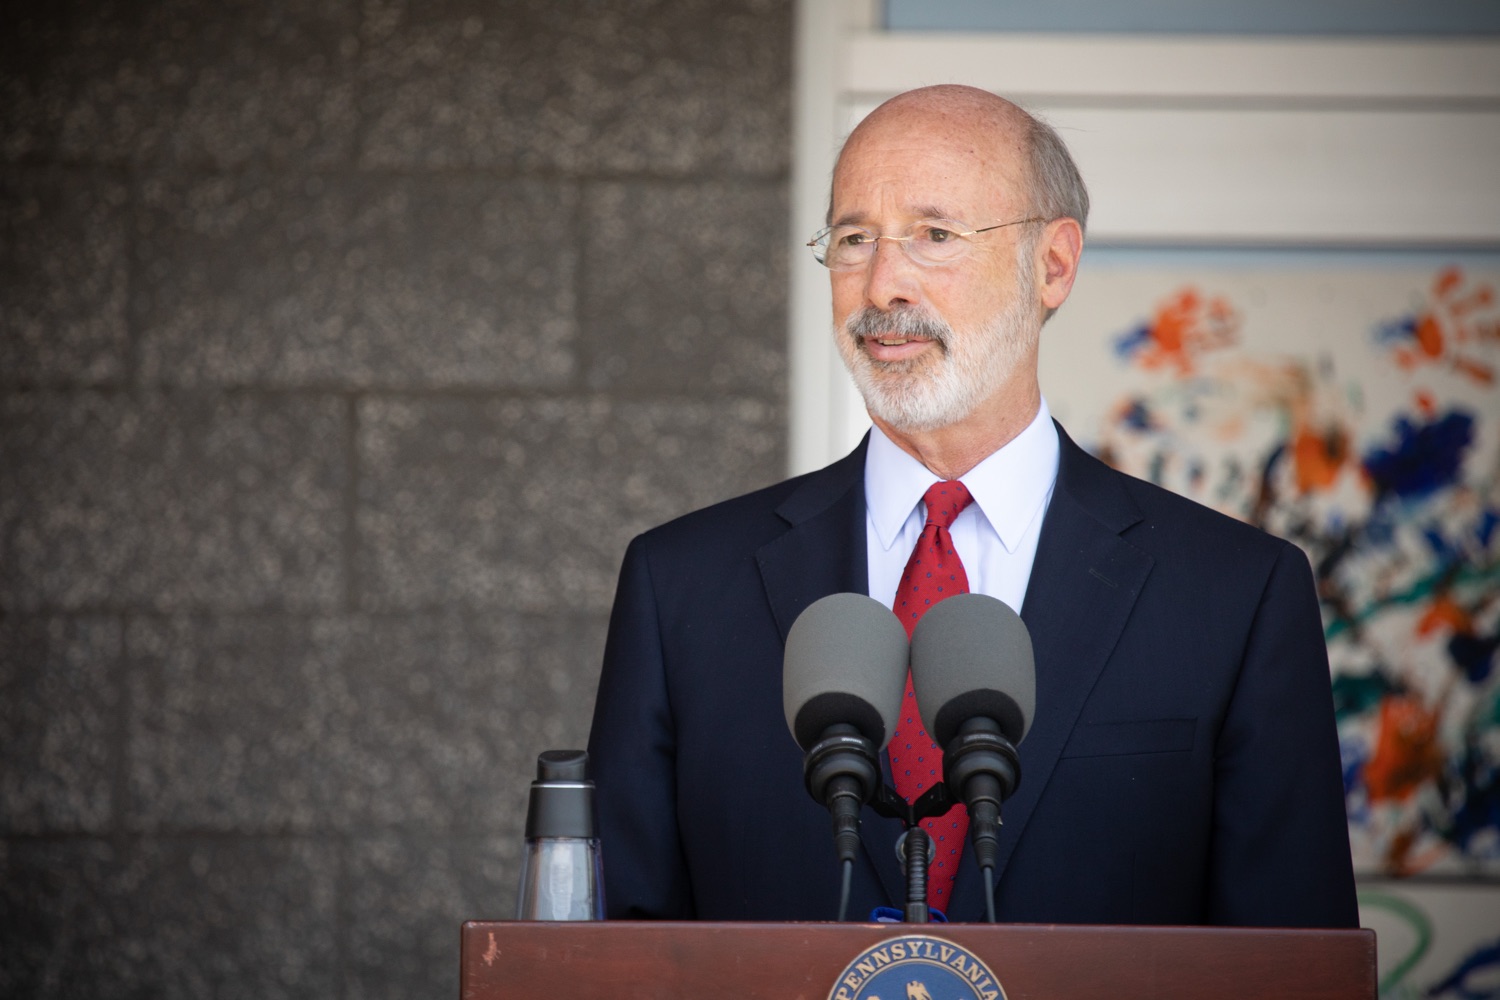 Pennsylvania Governor Tom Wolf speaking with the press.  Governor Tom Wolf visited the child care center at PSECU headquarters in Harrisburg today to announce $53 million in additional financial support for child care providers that have suffered during COVID-19.  Harrisburg, PA  July 6, 2020..<br><a href="https://filesource.amperwave.net/commonwealthofpa/photo/18143_gov_cares_dz_13.jpg" target="_blank">⇣ Download Photo</a>